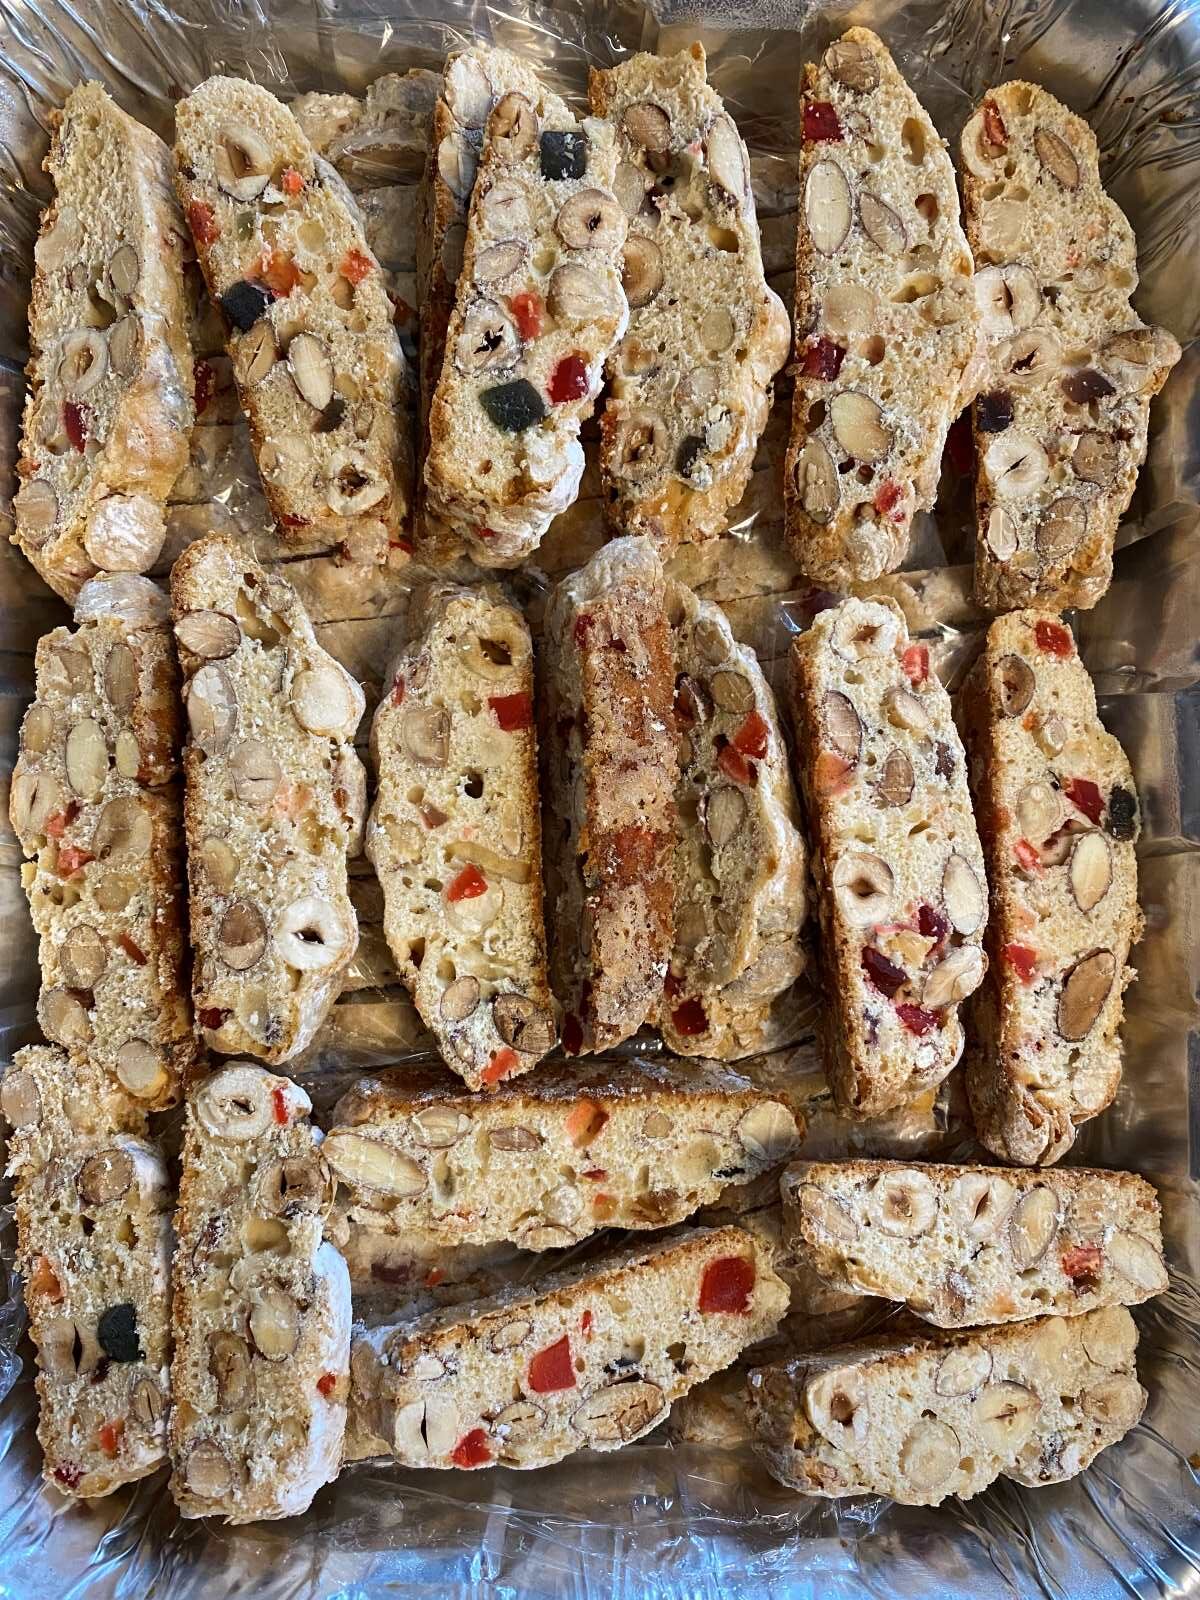 Biscotti with Dried Fruit layered in a aluminum tray